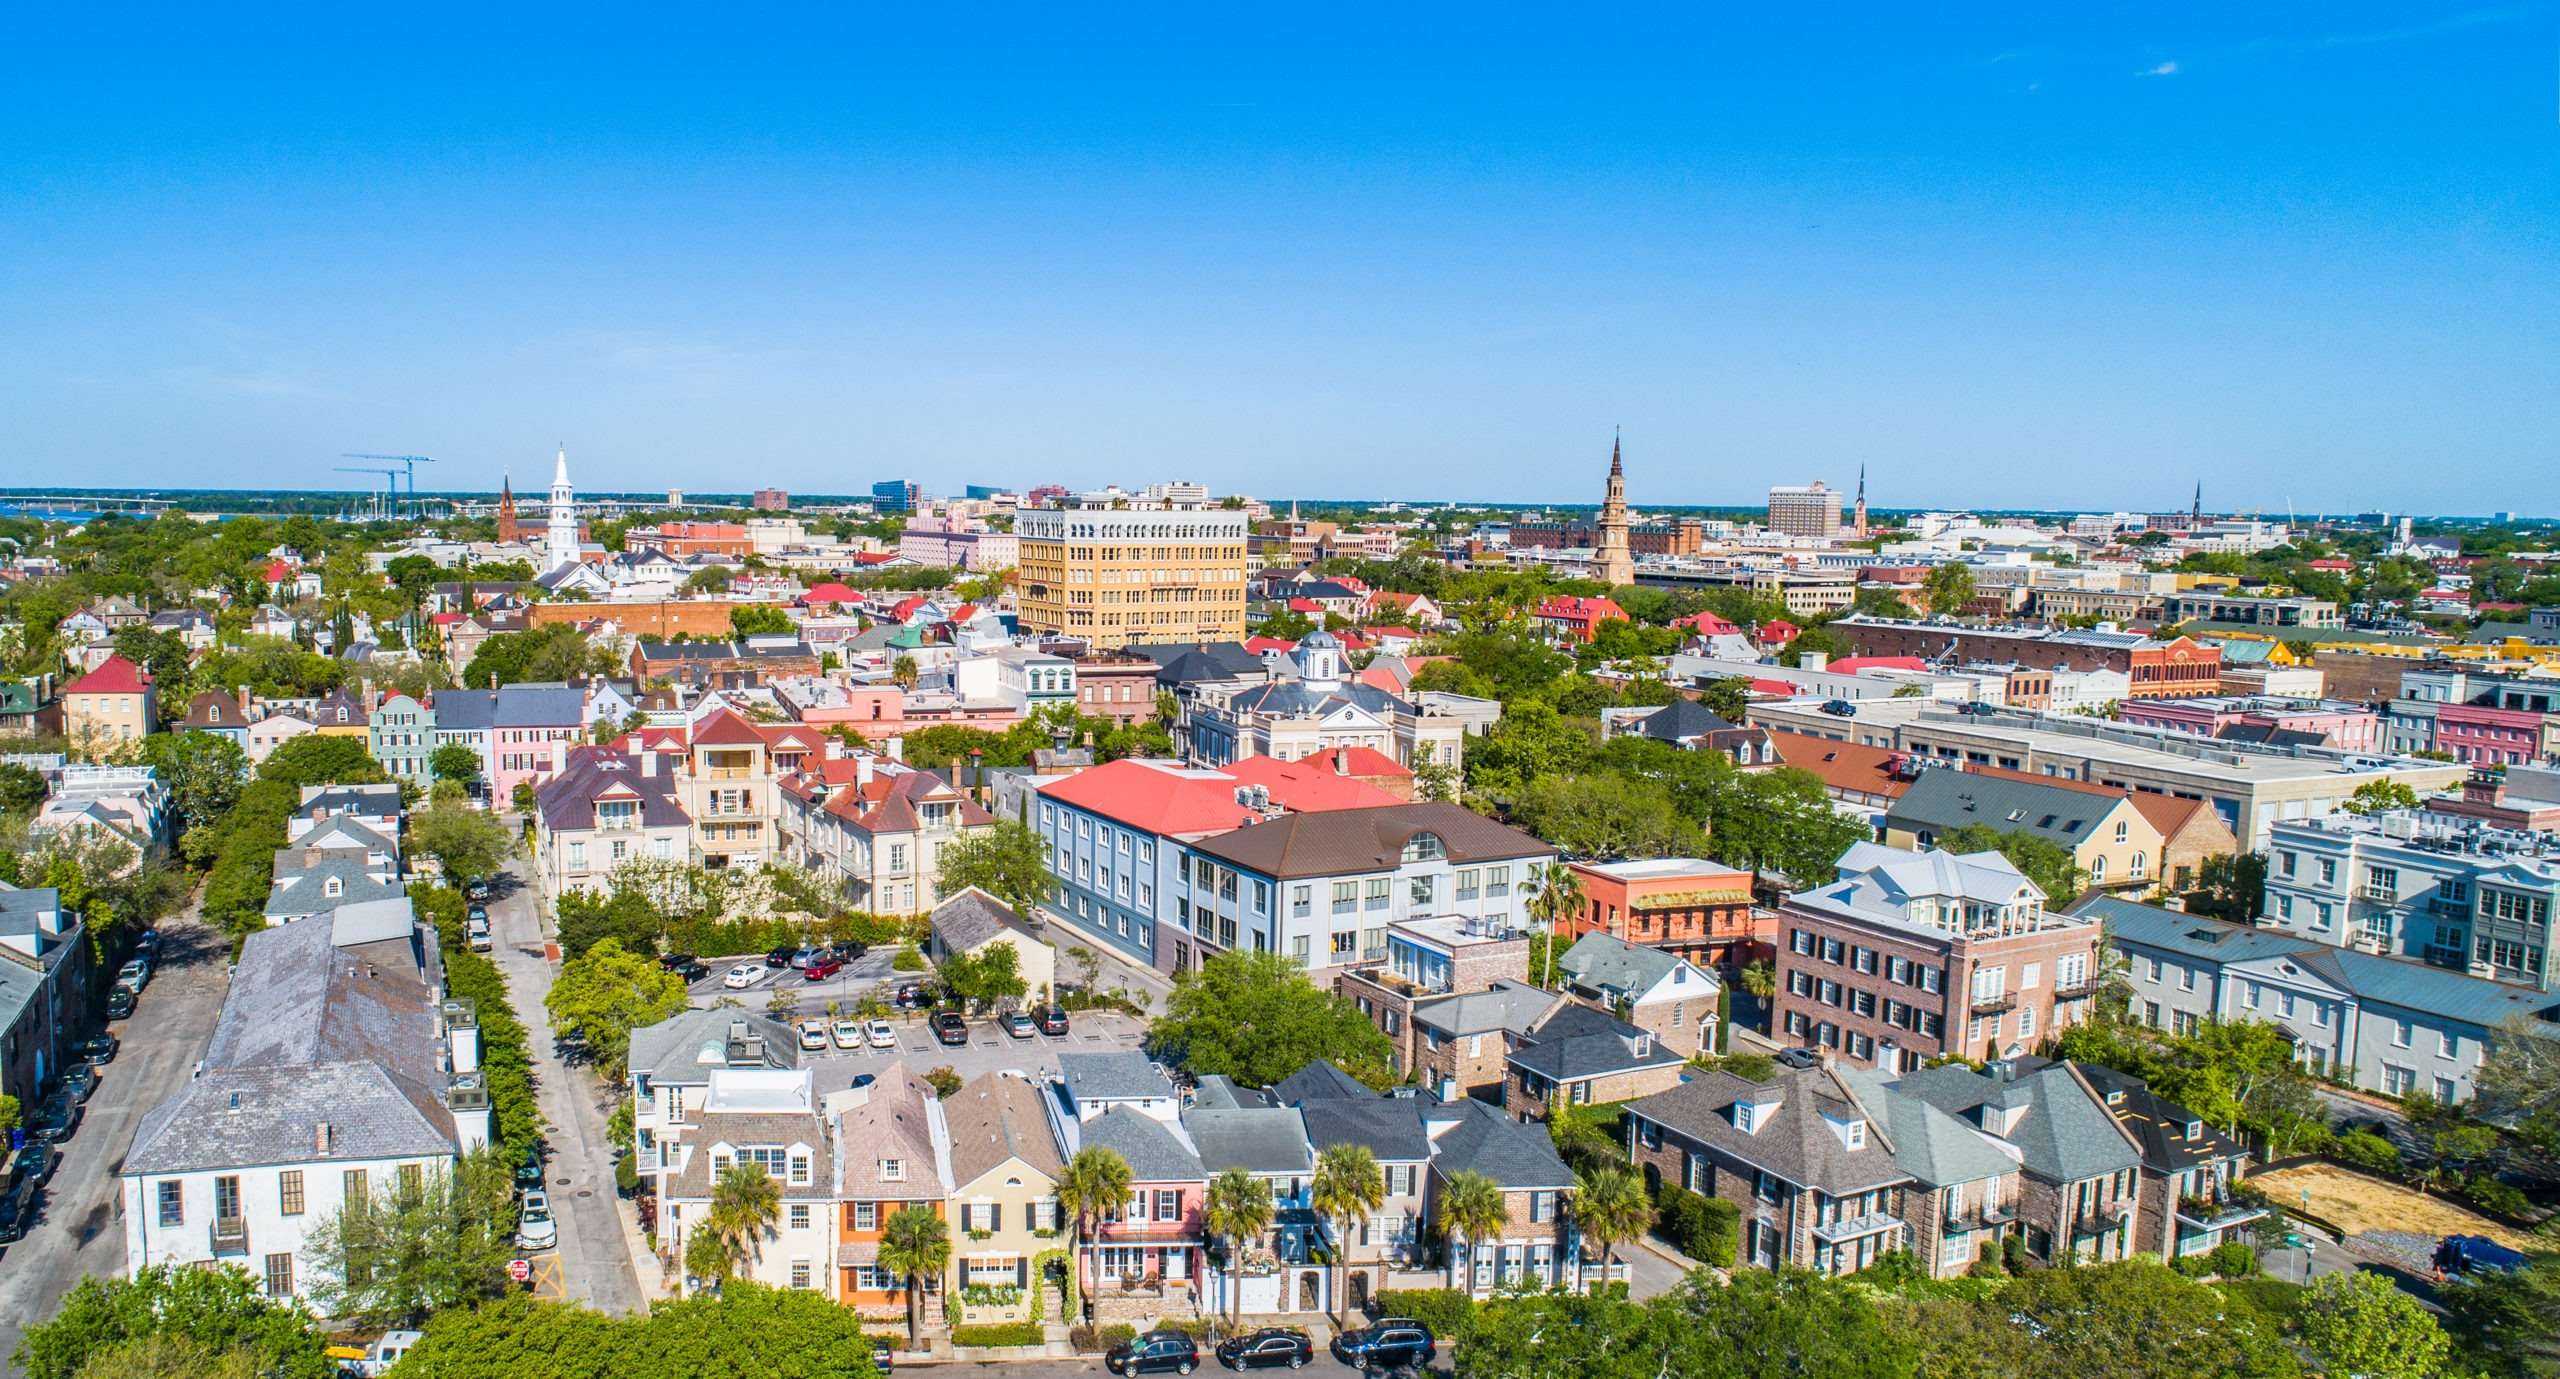 Aerial view of downtown Charleston, SC